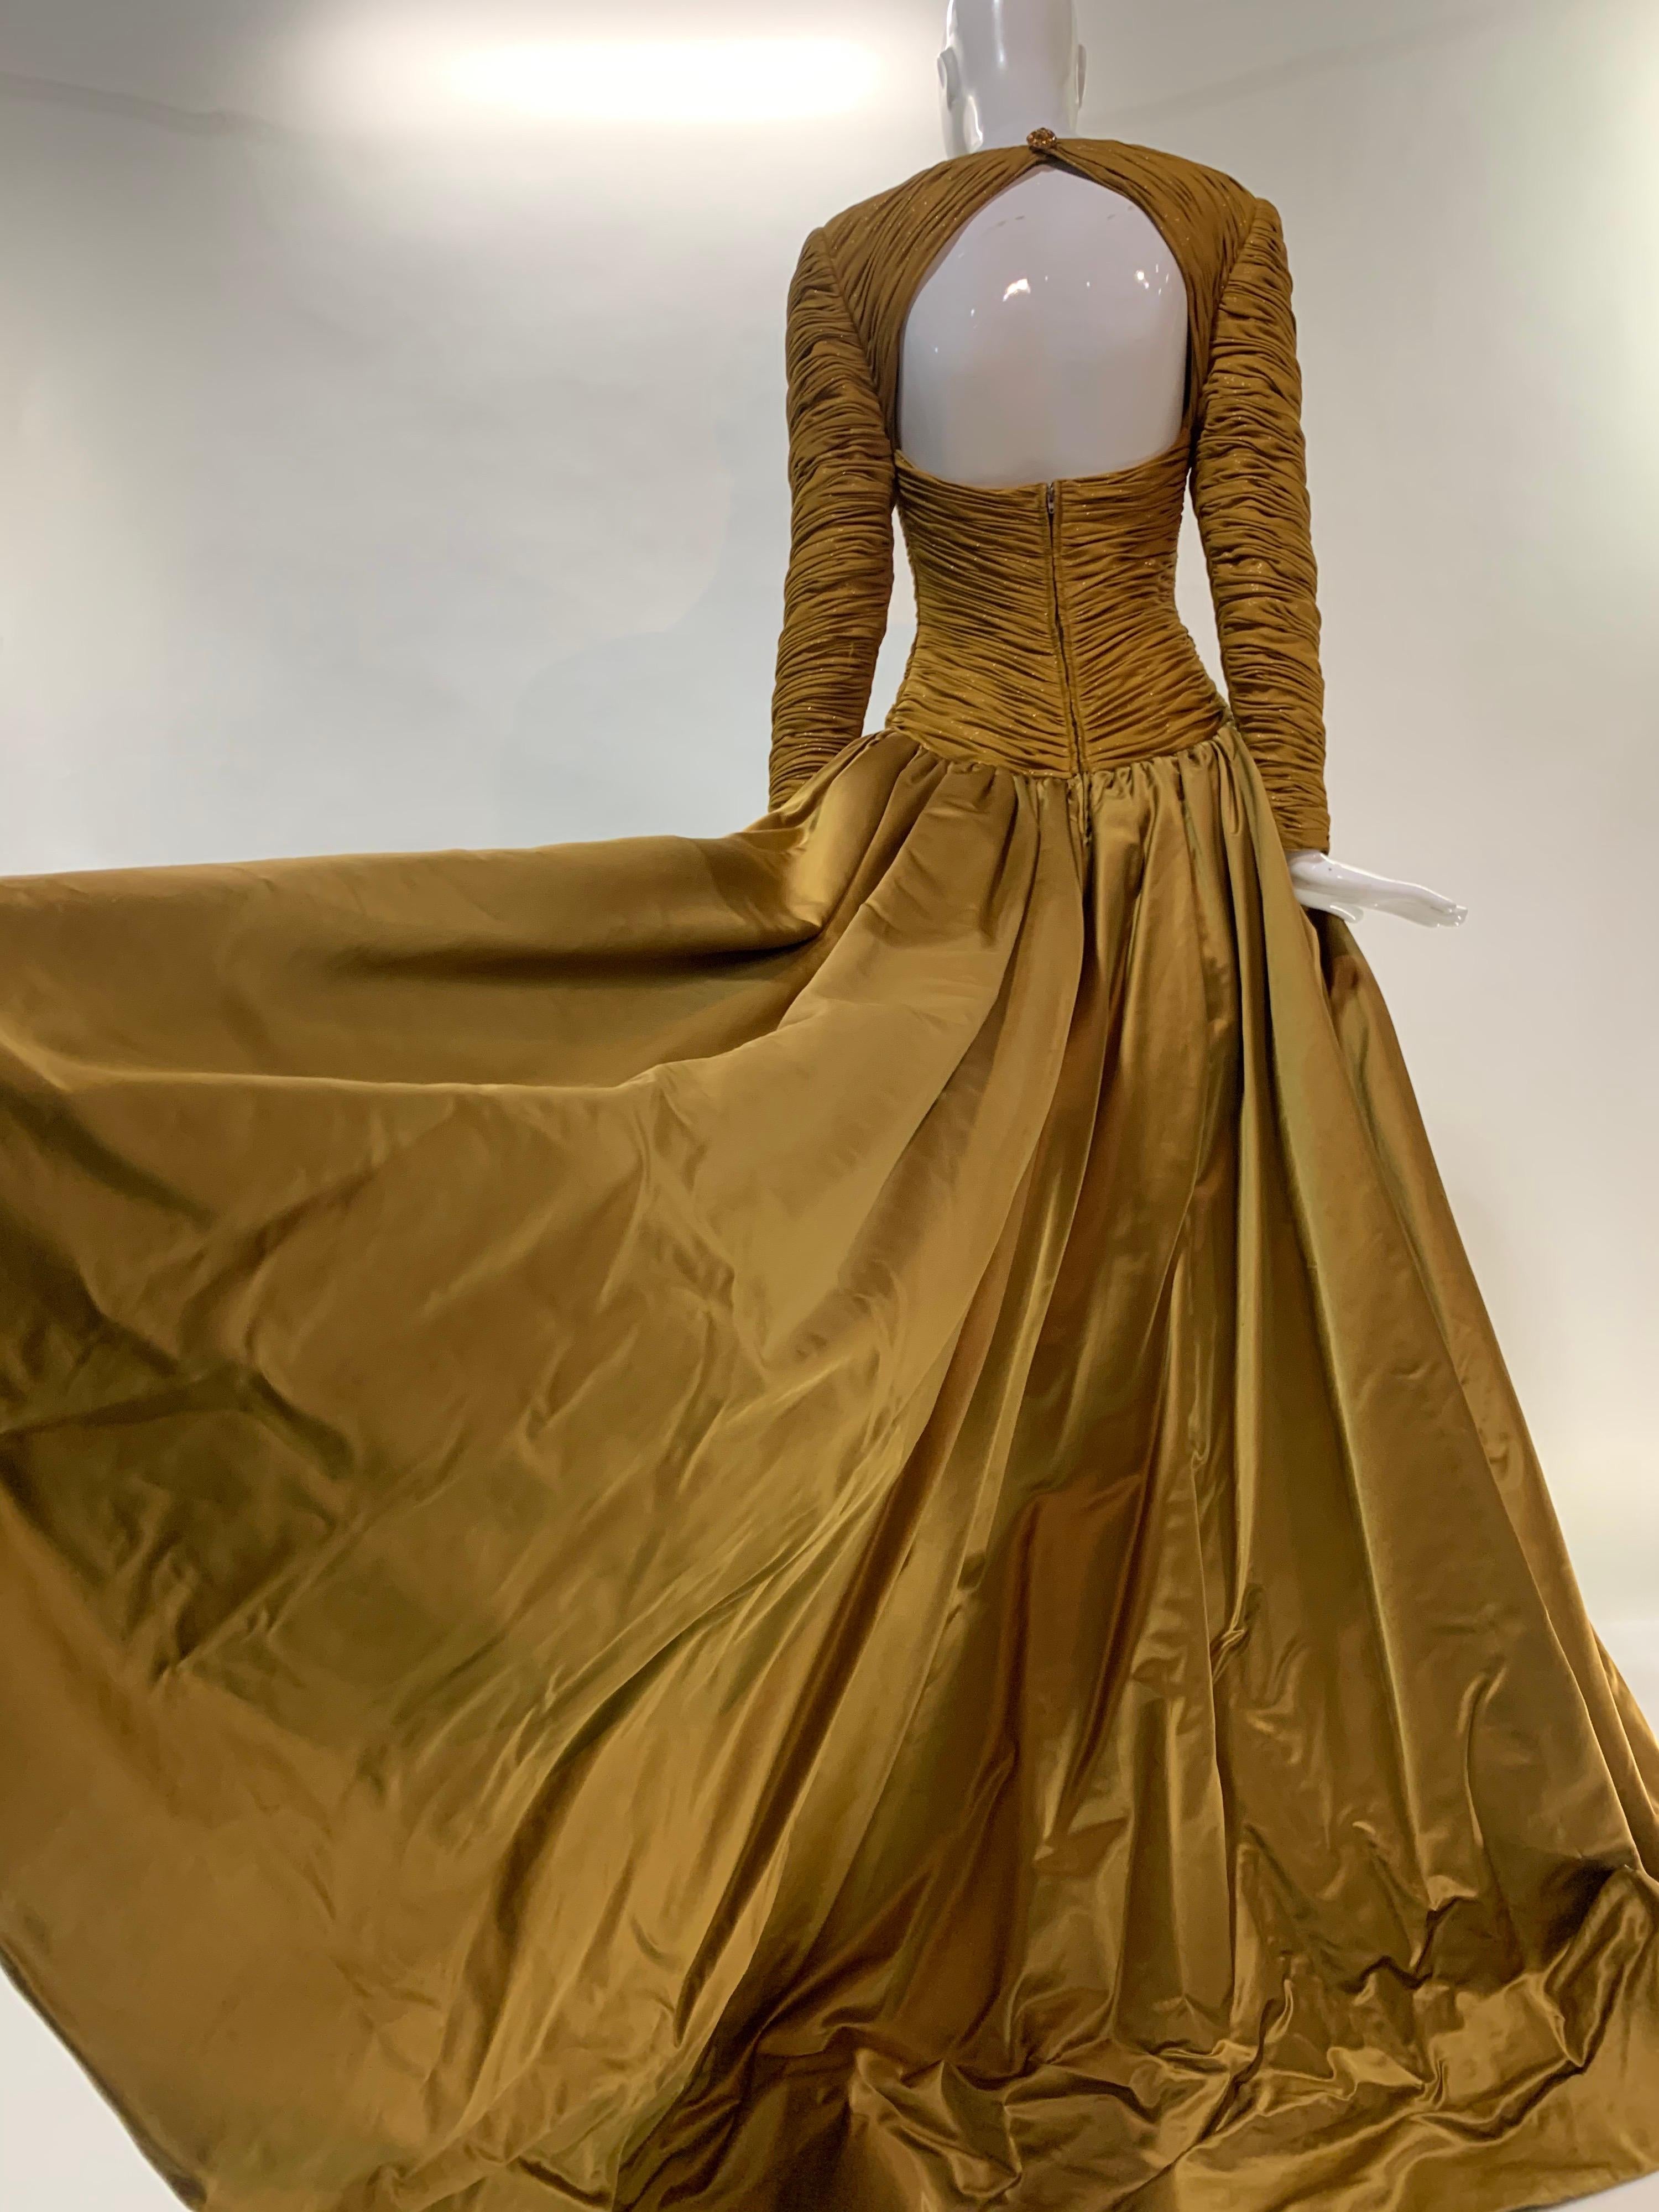 1990s Demi-Couture Gold Silk Ball Gown w/ Velvet Sheath & Dramatic Satin Skirt  For Sale 3